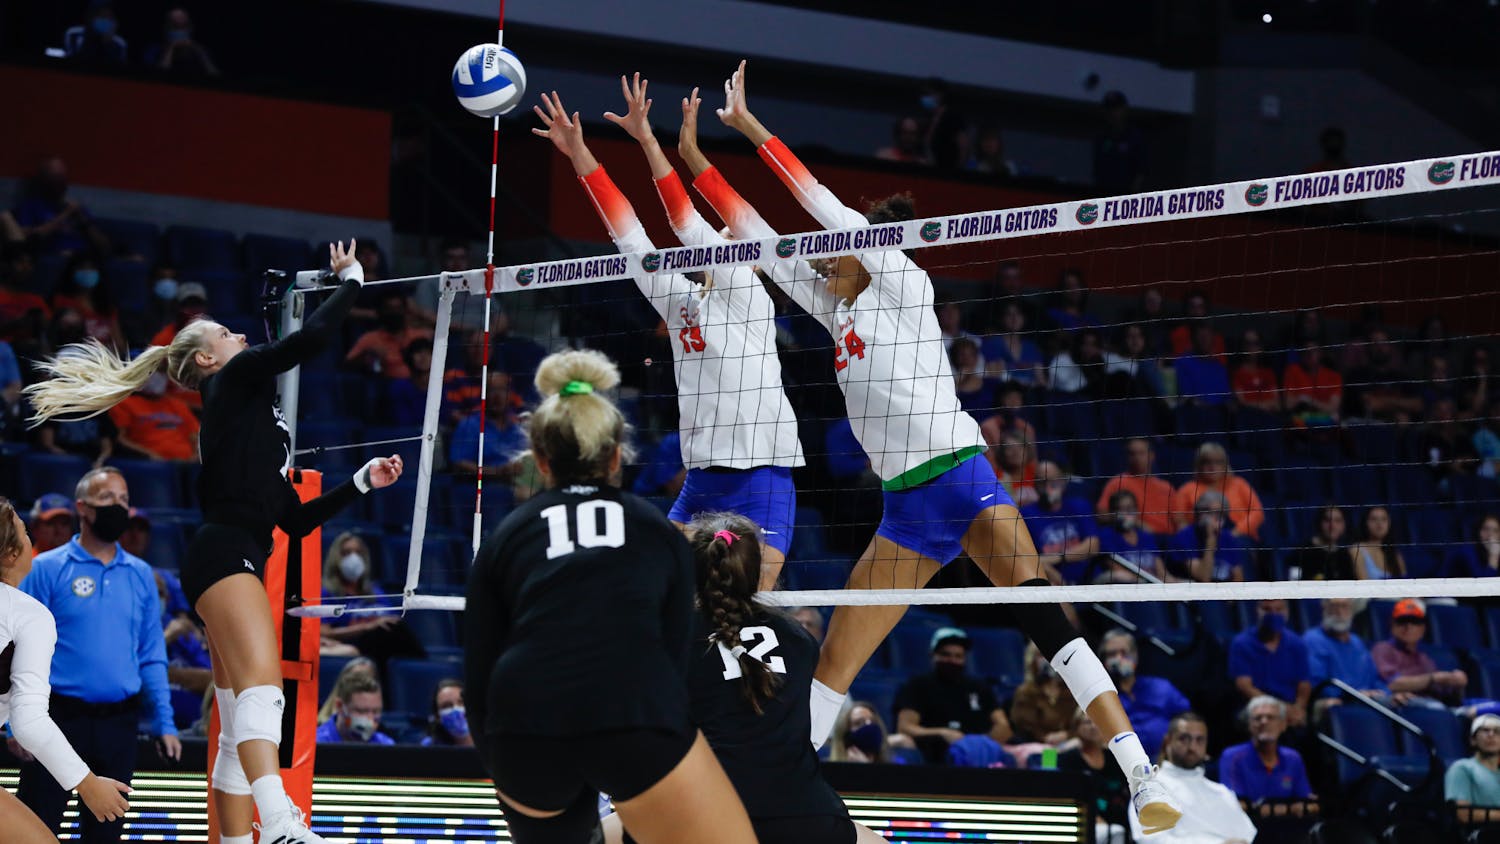 Florida volleyball's Merritt Beason (13) and Lauren Forte (24) go up for a block in a game against Texas A&M on Oct. 16.